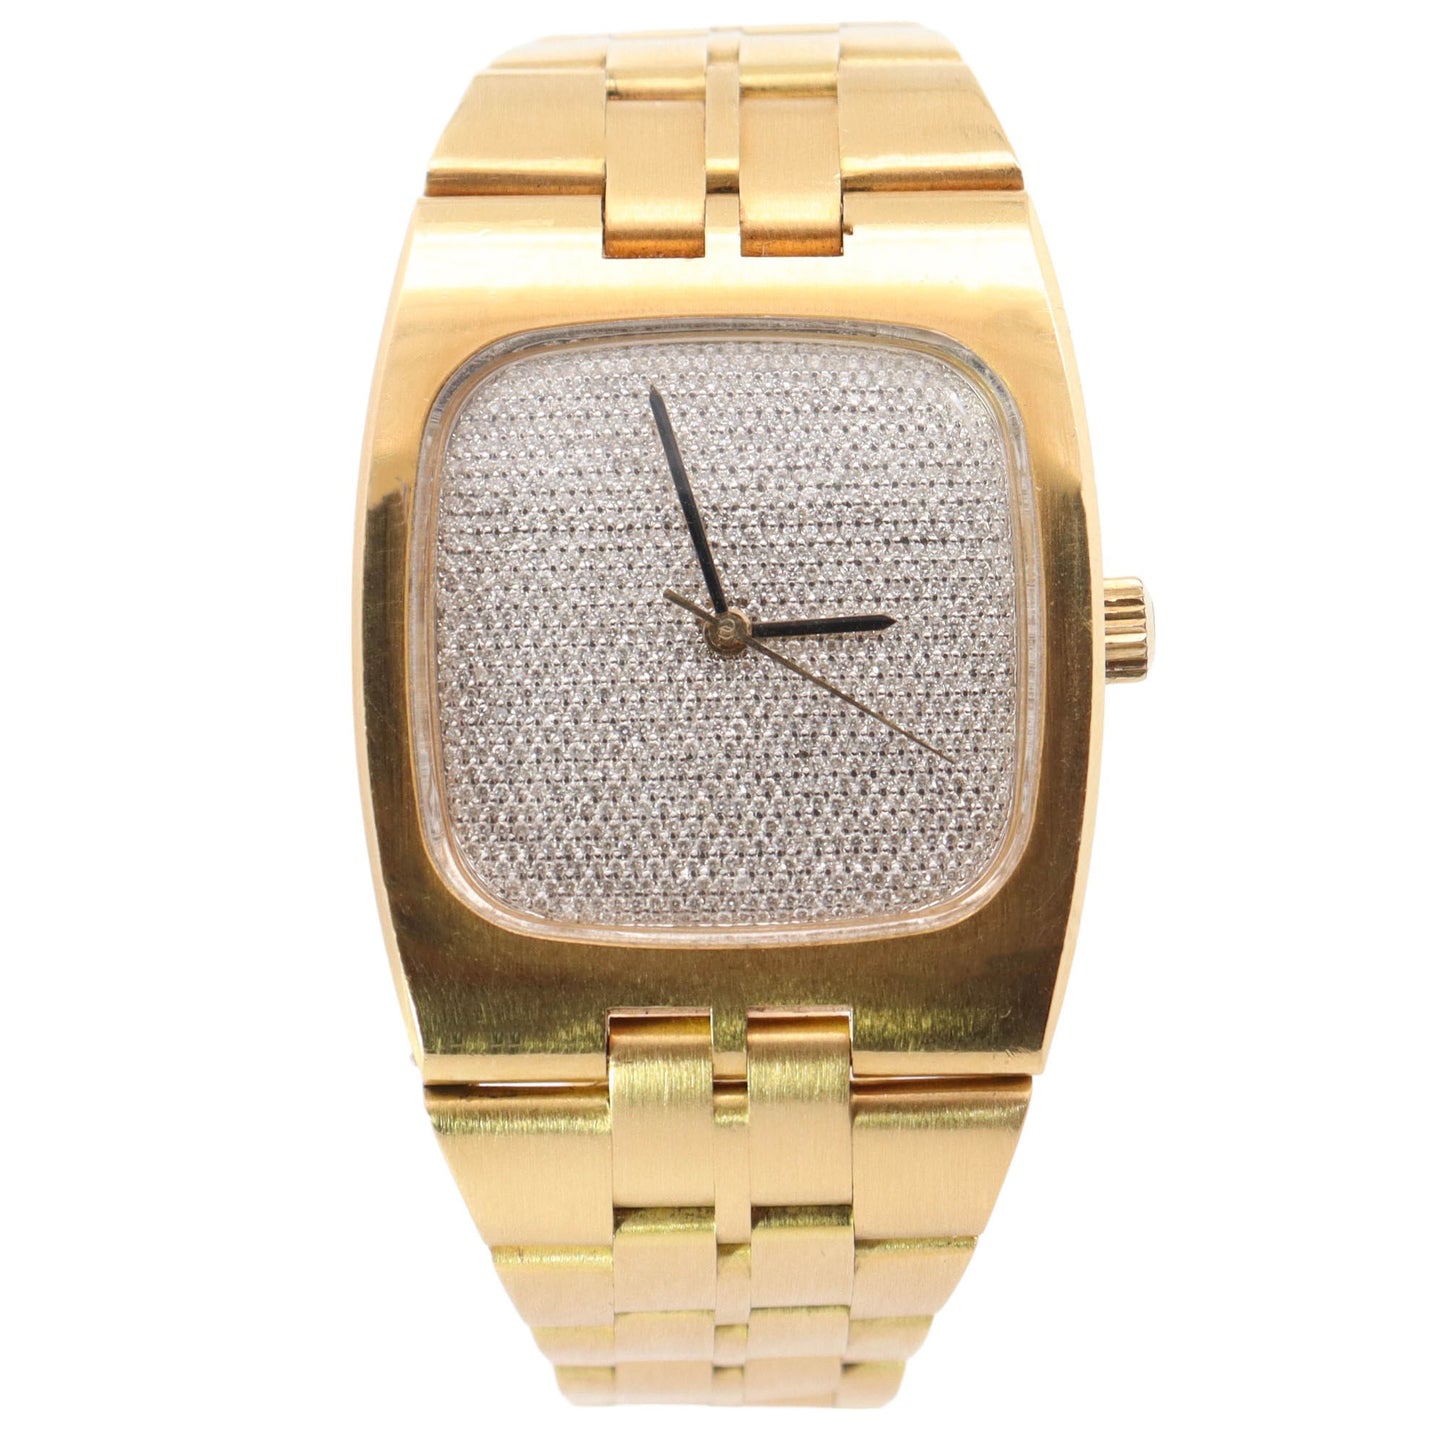 Omega Constellation Yellow Gold 33x39mm Custom Diamond Pave Dial Watch Reference #: 166.059